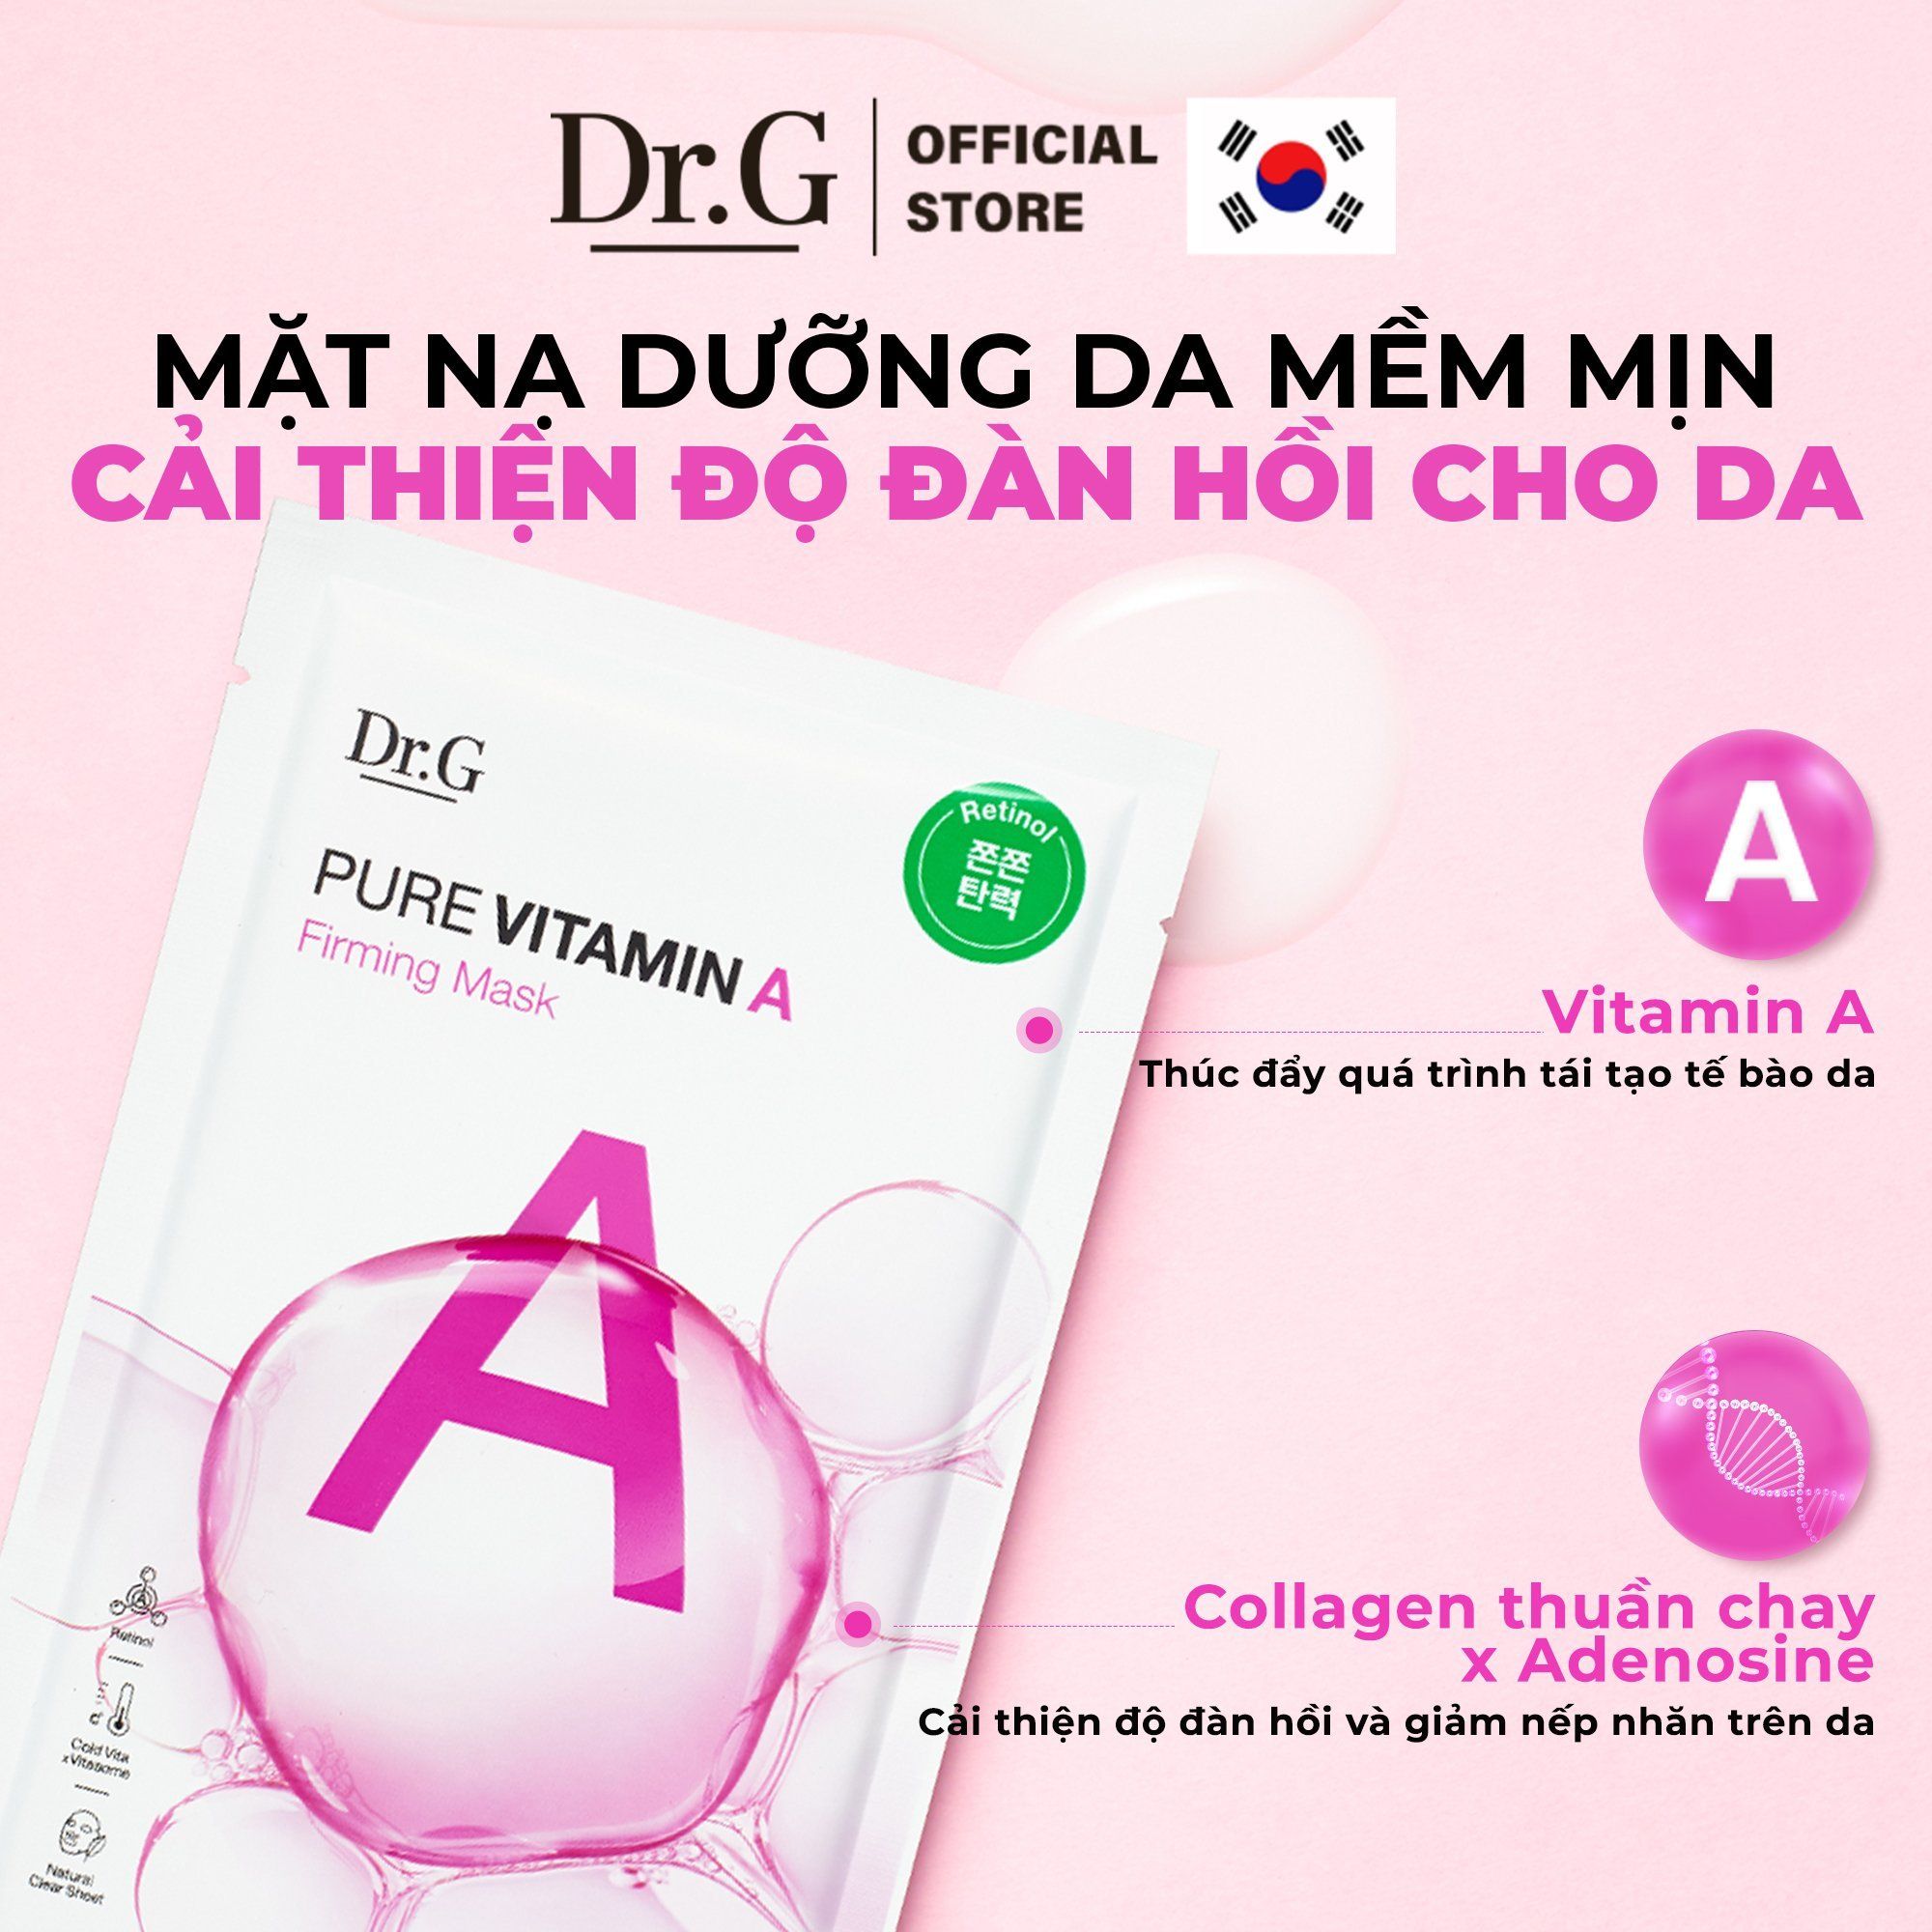  Mặt nạ giấy Dr.G Pure Vitamin A Firming Mask 23g 